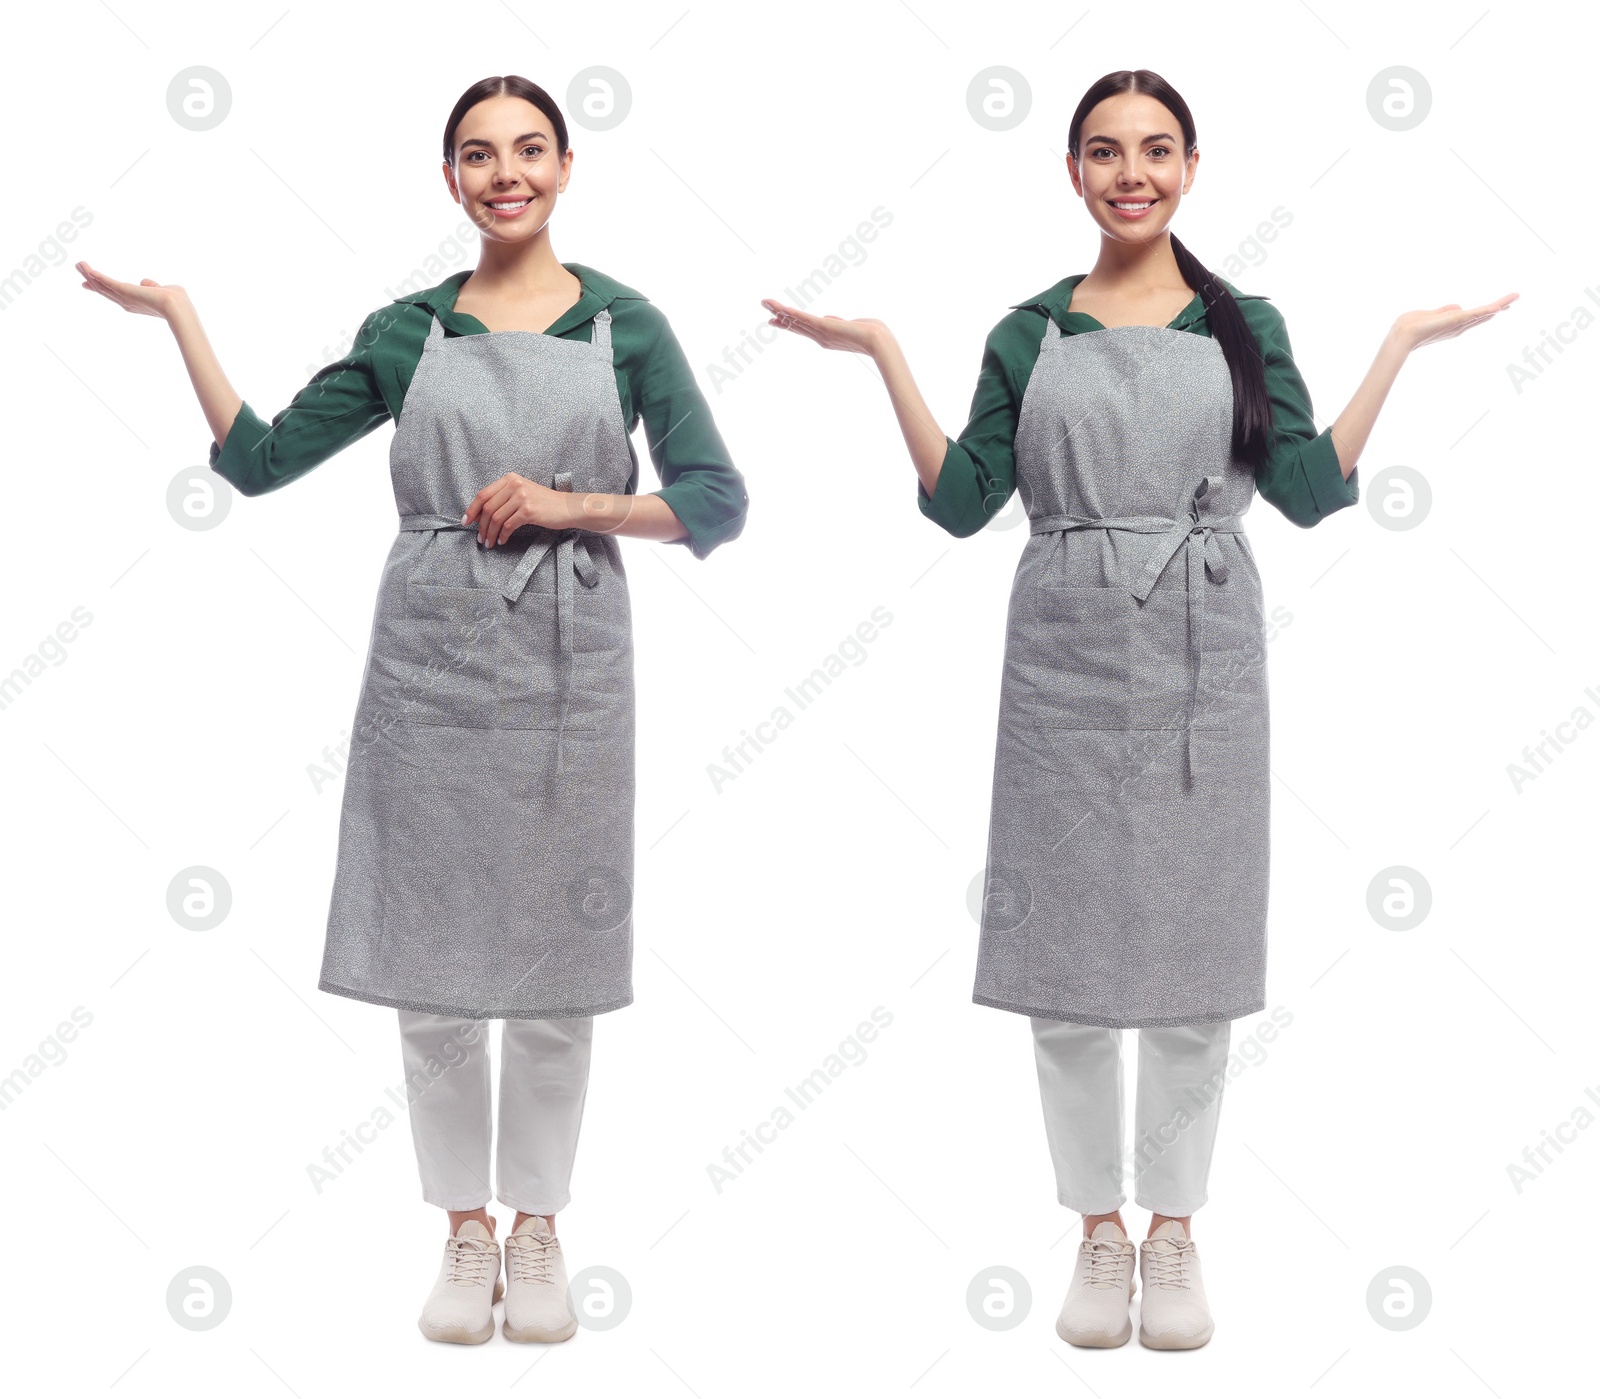 Image of Collage with photos of woman in apron on white background